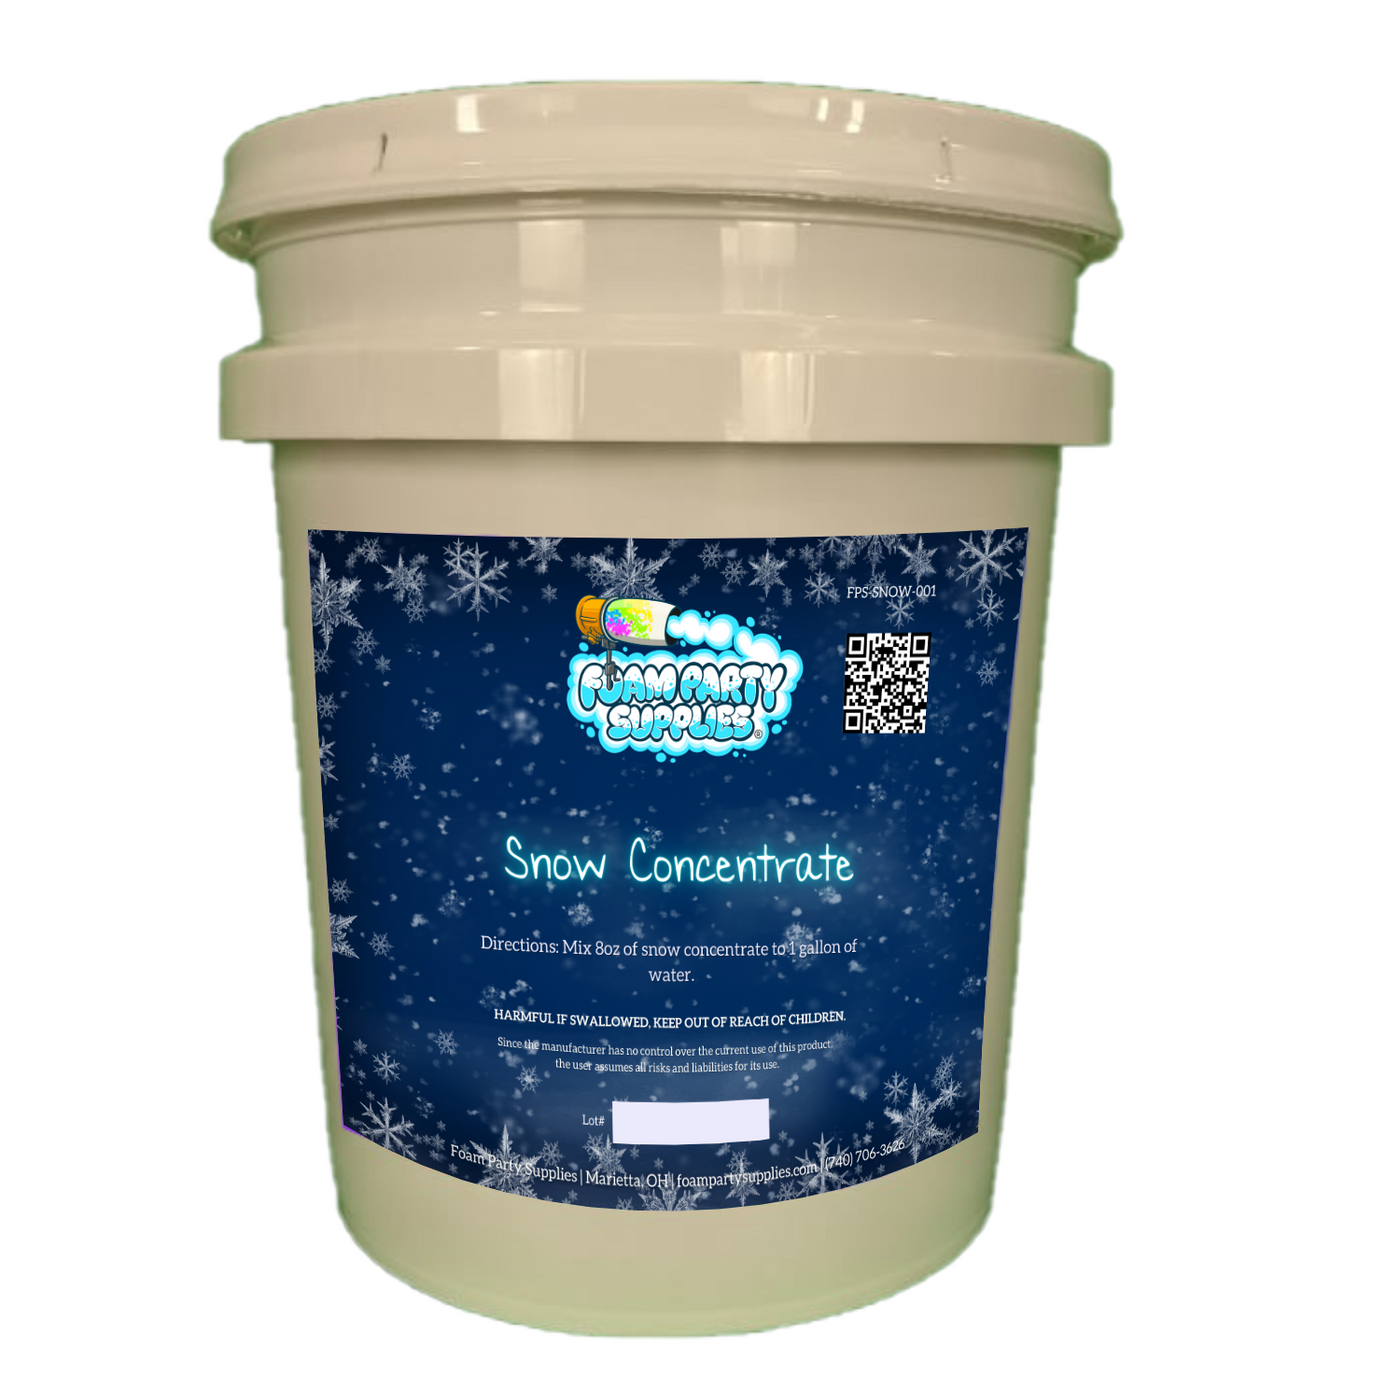 Snow Concentrate